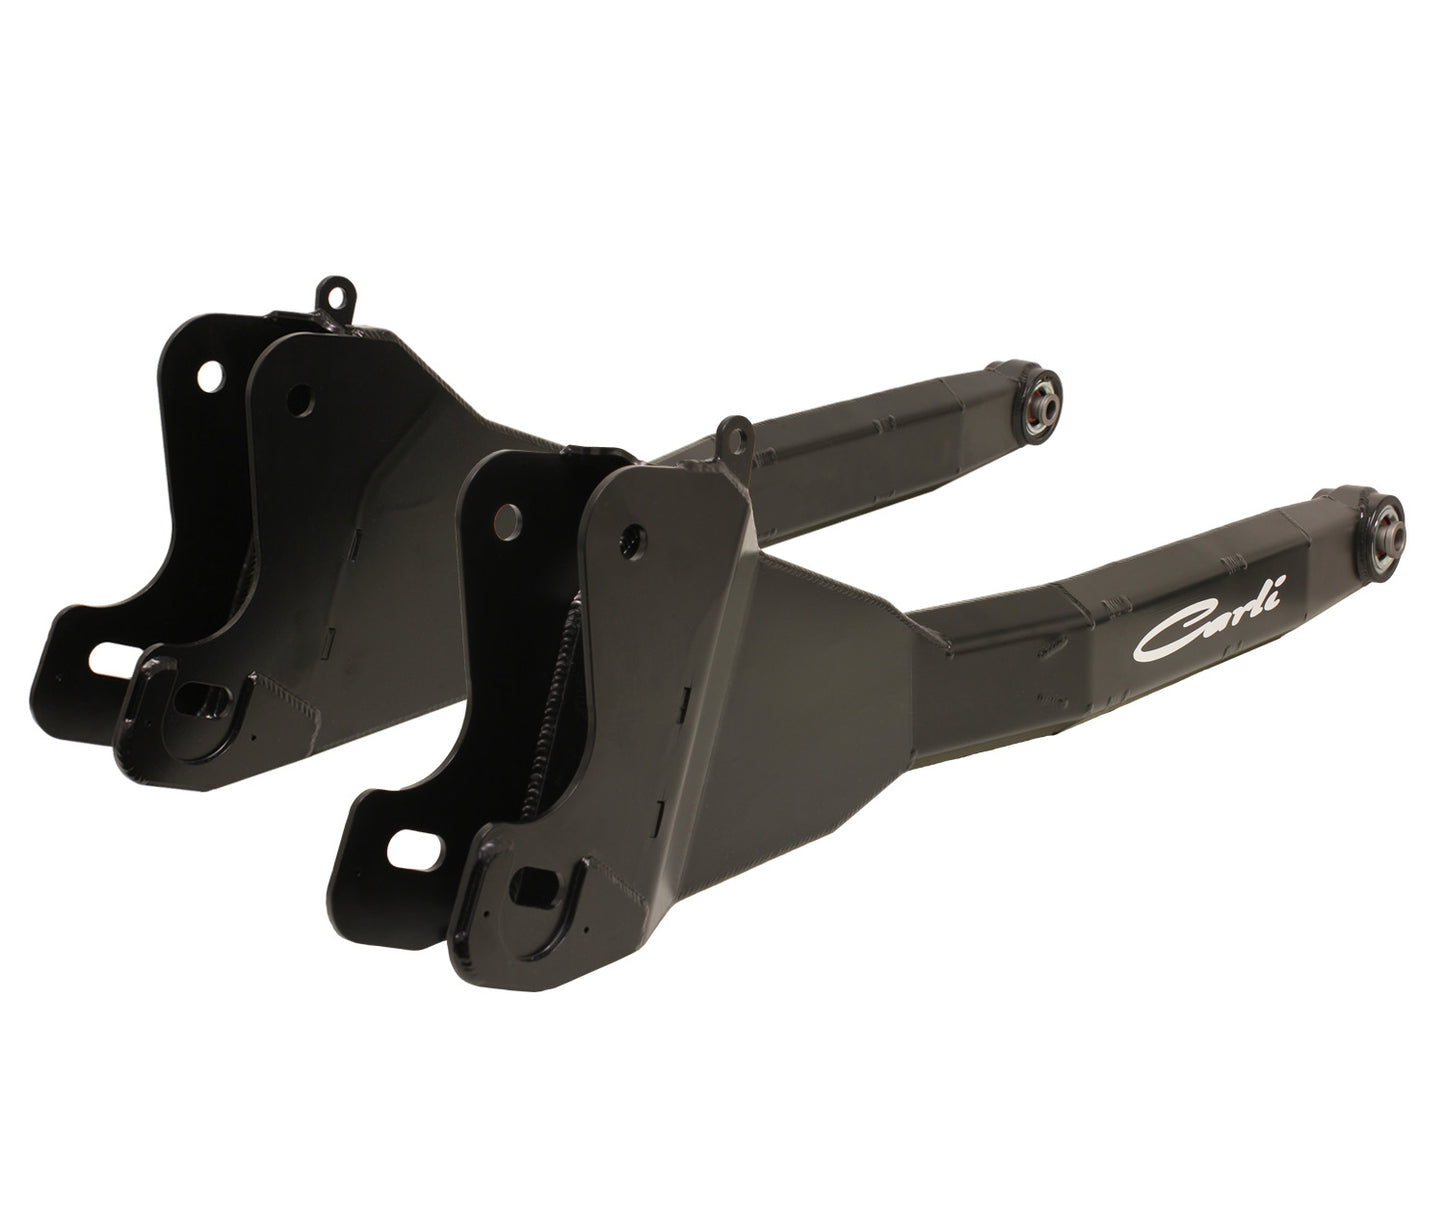 Carli 14+ Ram 2500/3500 4x4 Fabricated Radius Arms for 3.25" Lift Systems, 12" Limit Straps